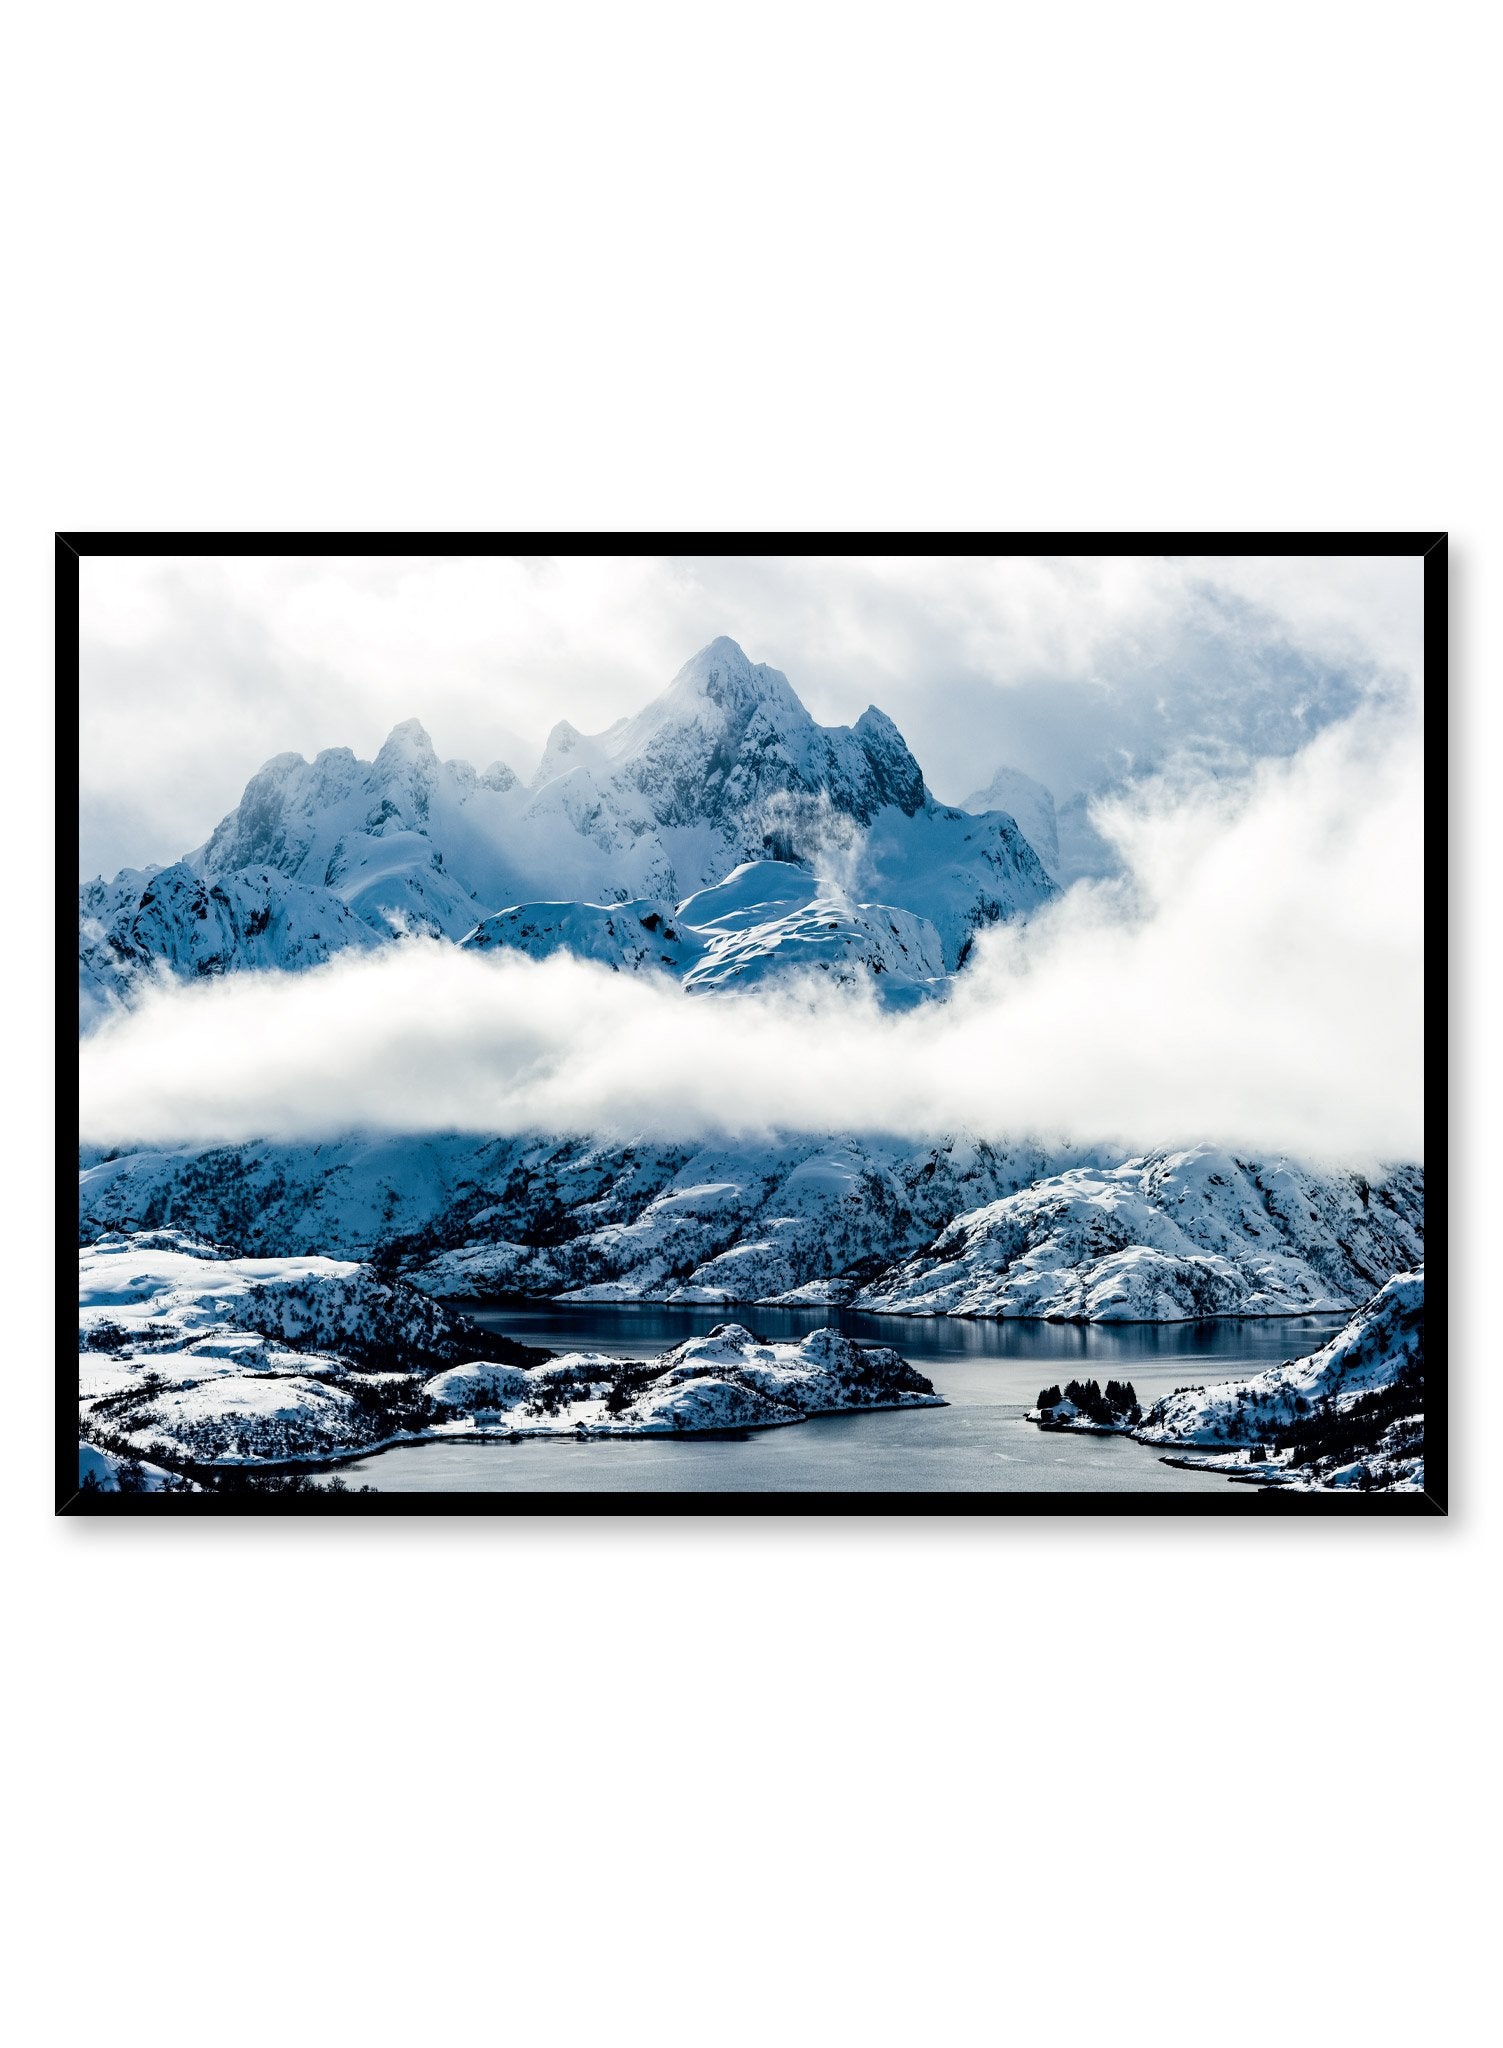 Landscape photography poster by Opposite Wall with mountain peaks